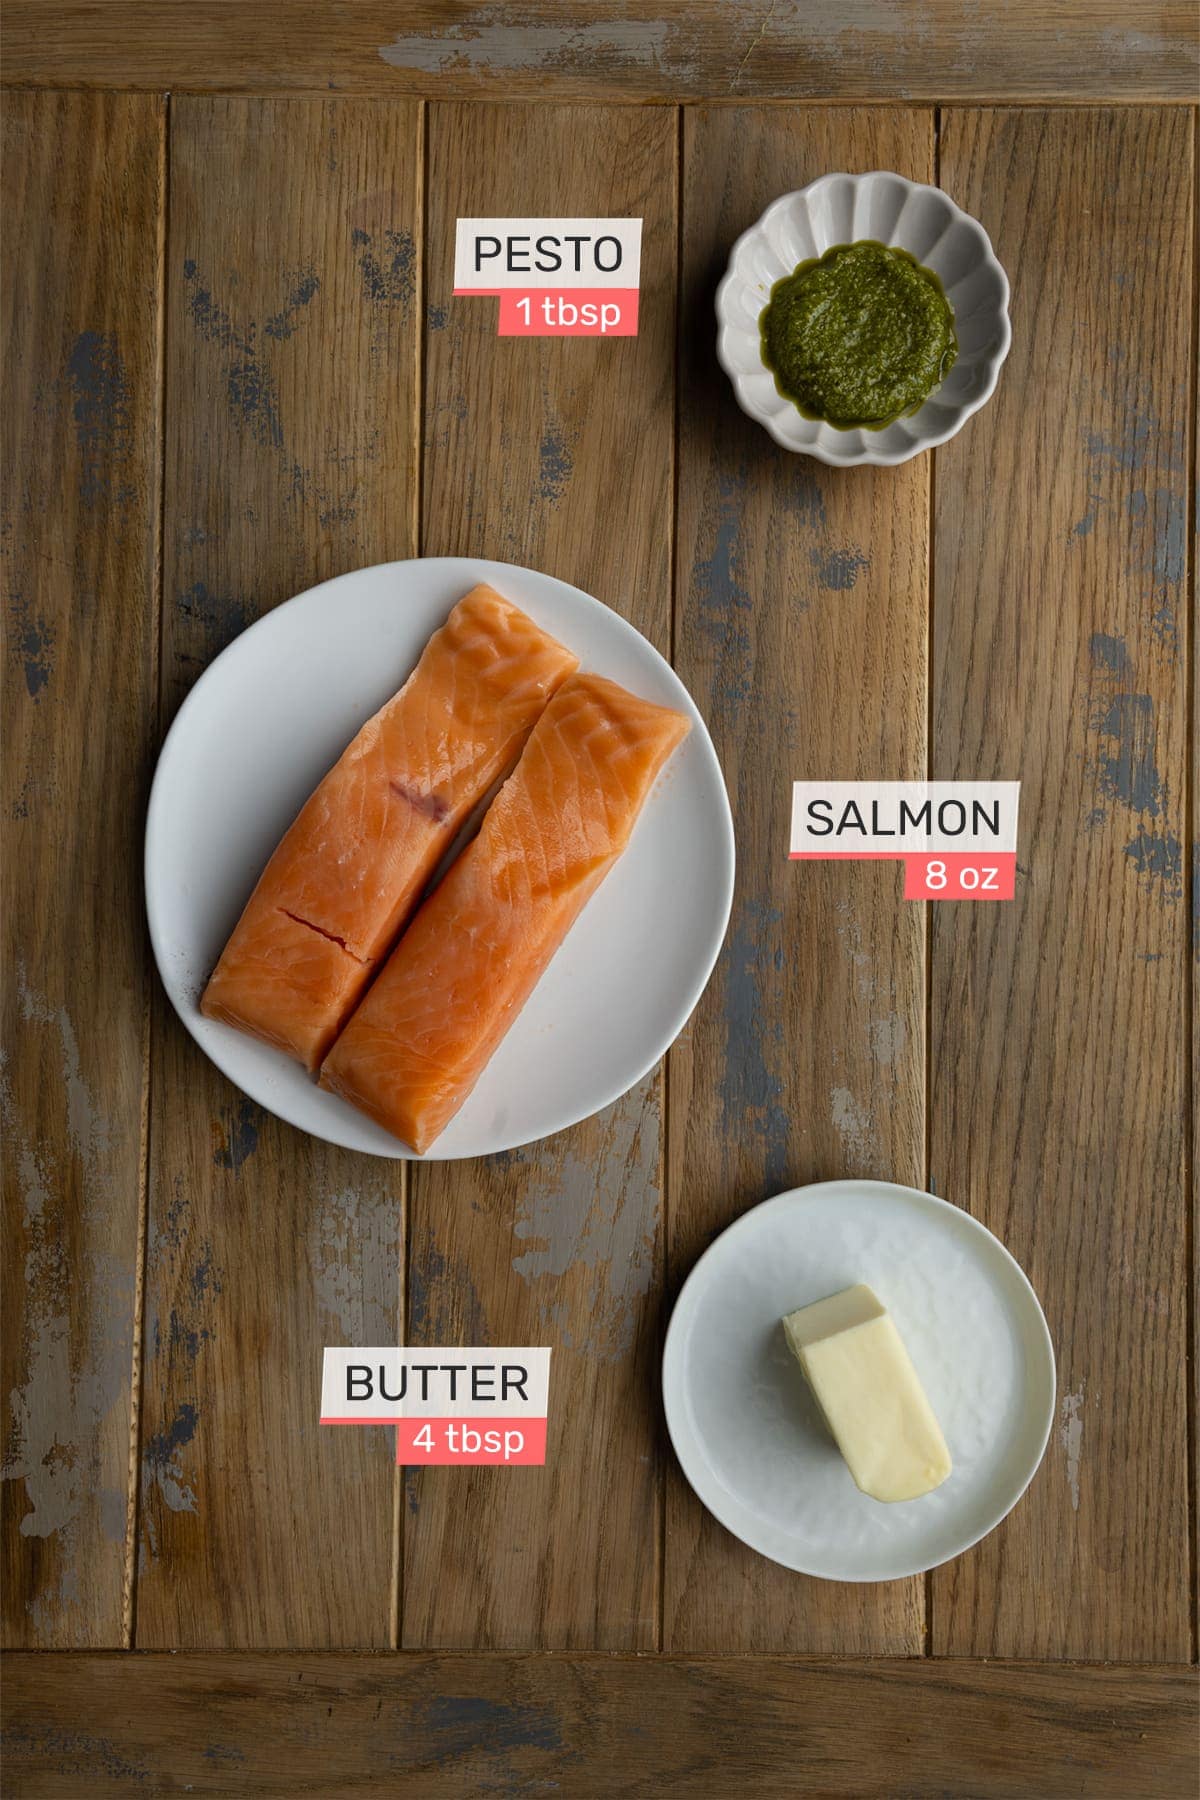 pesto butter salmon ingredients - pesto, unsalted butter, and salmon